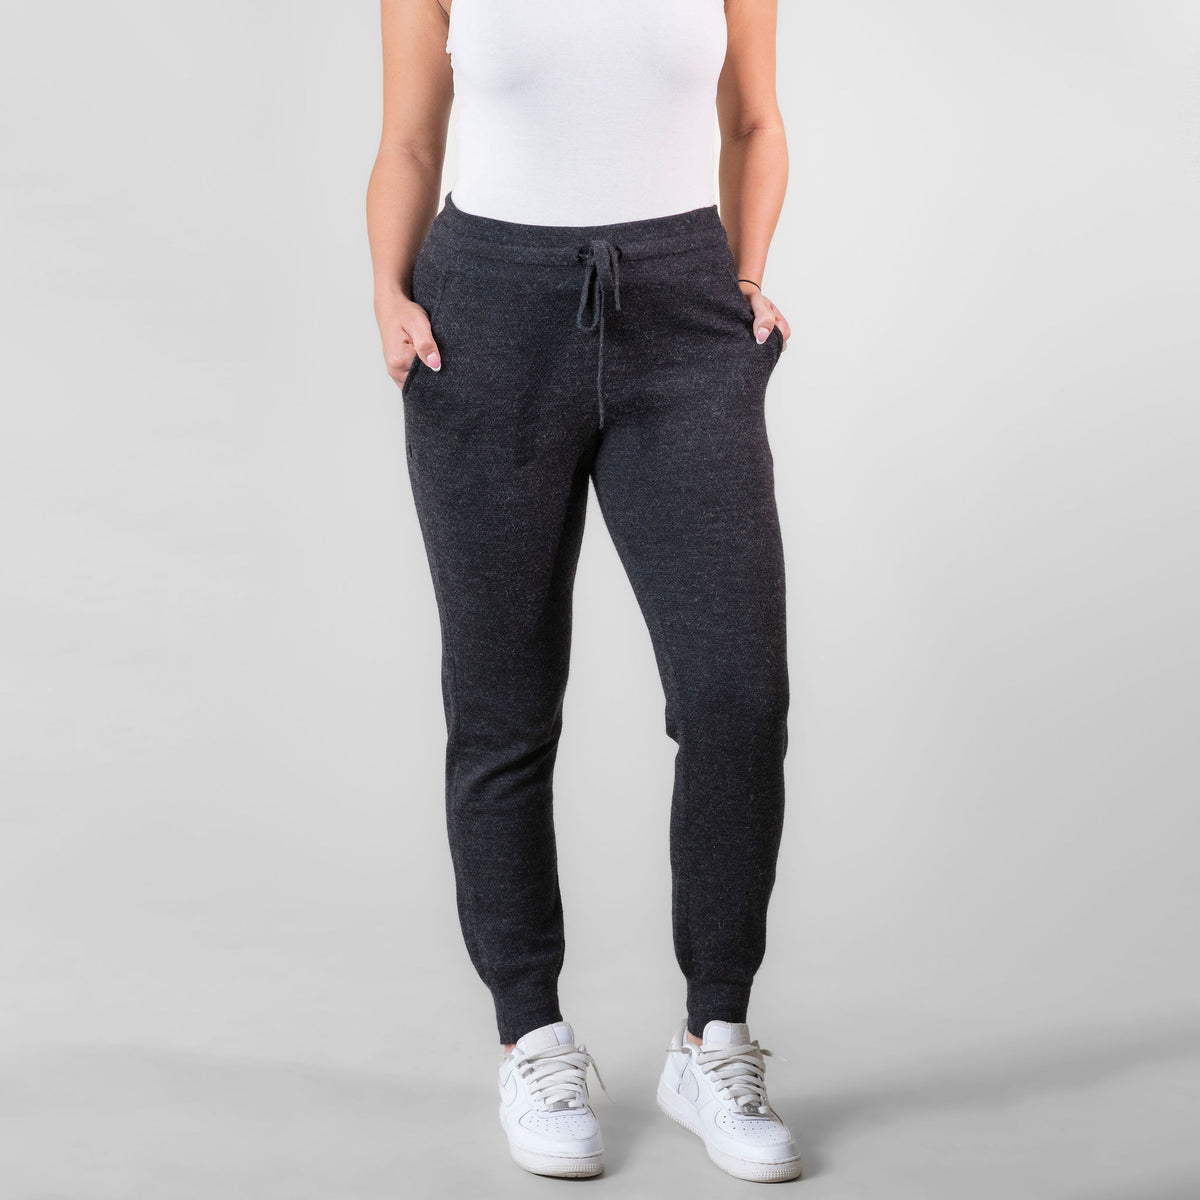 Women wearing charcoal alpaca joggers with hands in pockets